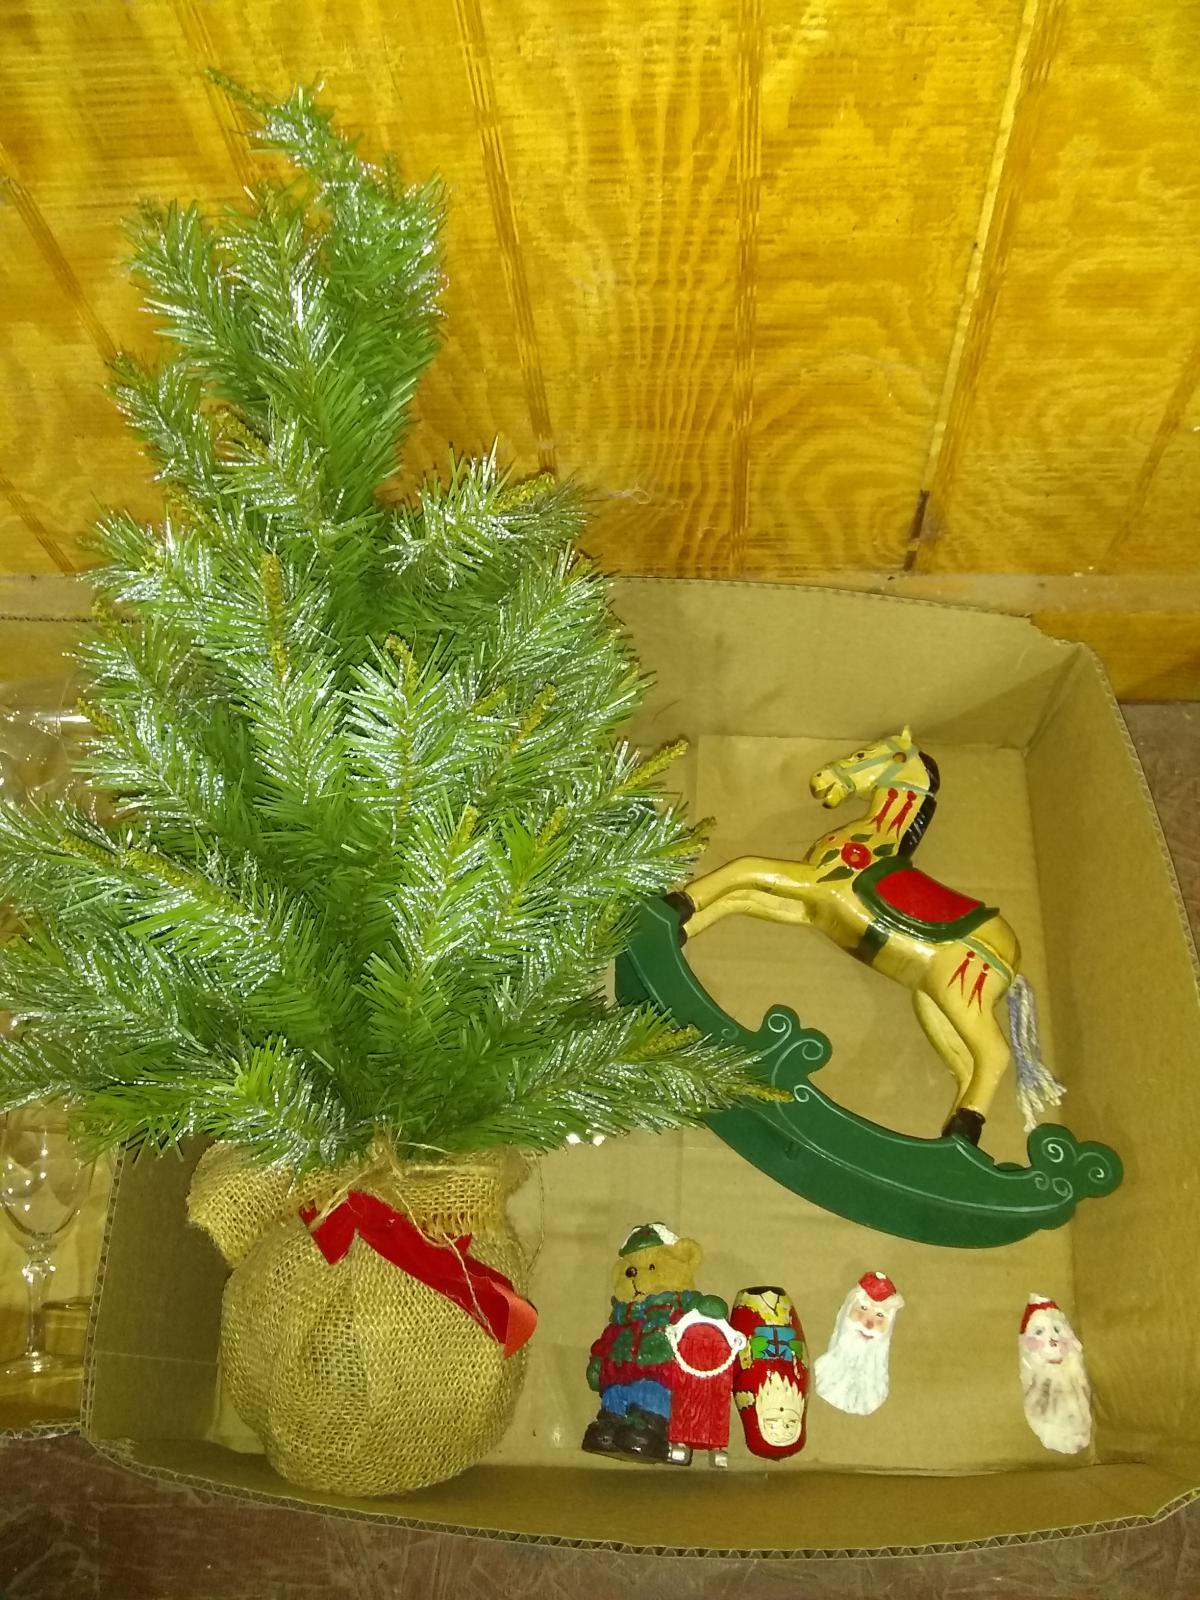 BL-Tabletop Christmas Tree, Wooden Rocking Horse & Christmas Figures